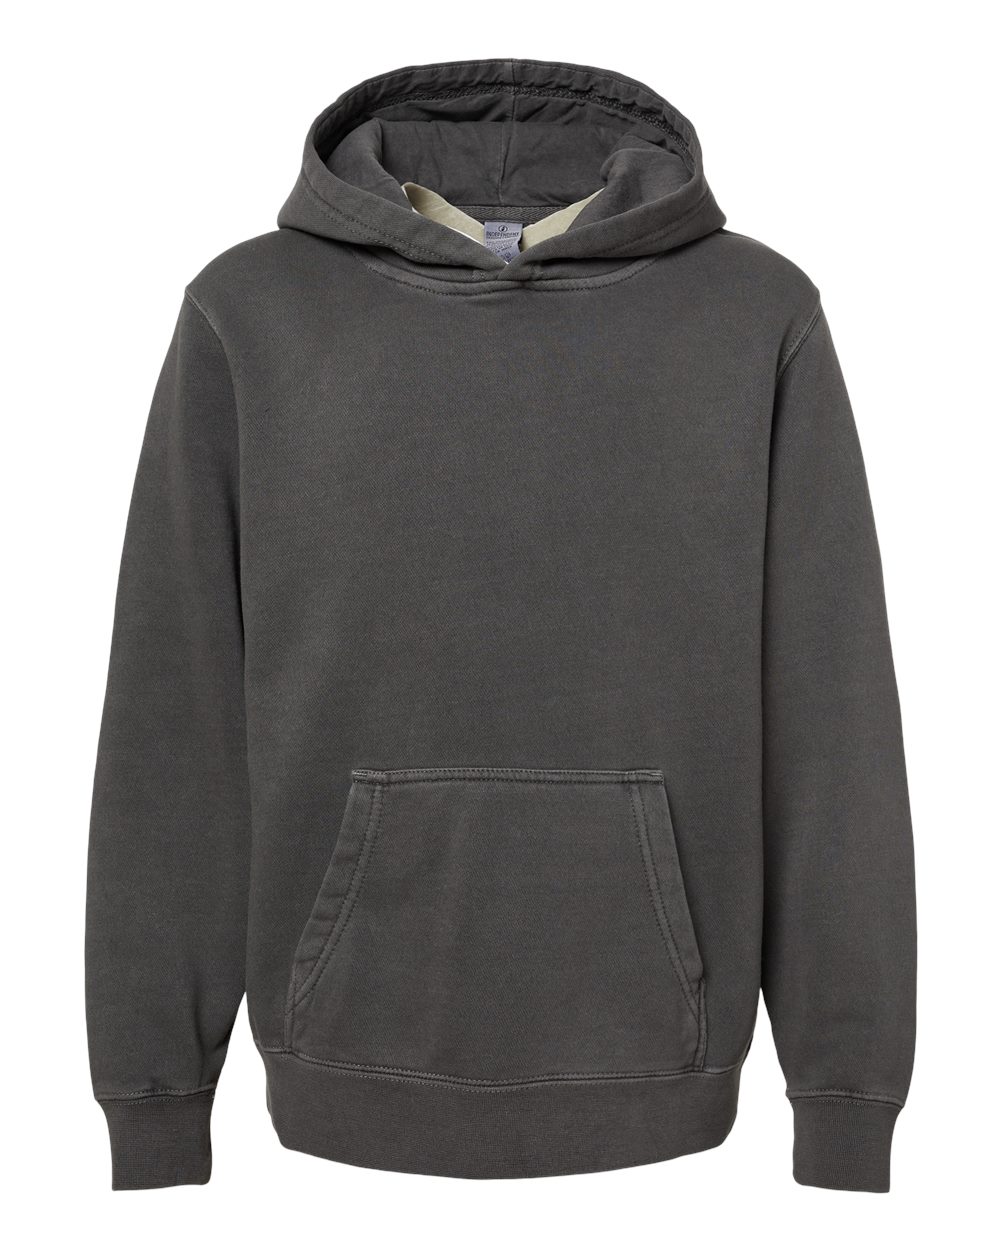 Independent Trading Co. PRM1500Y | Youth Midweight Pigment-Dyed Hooded ...